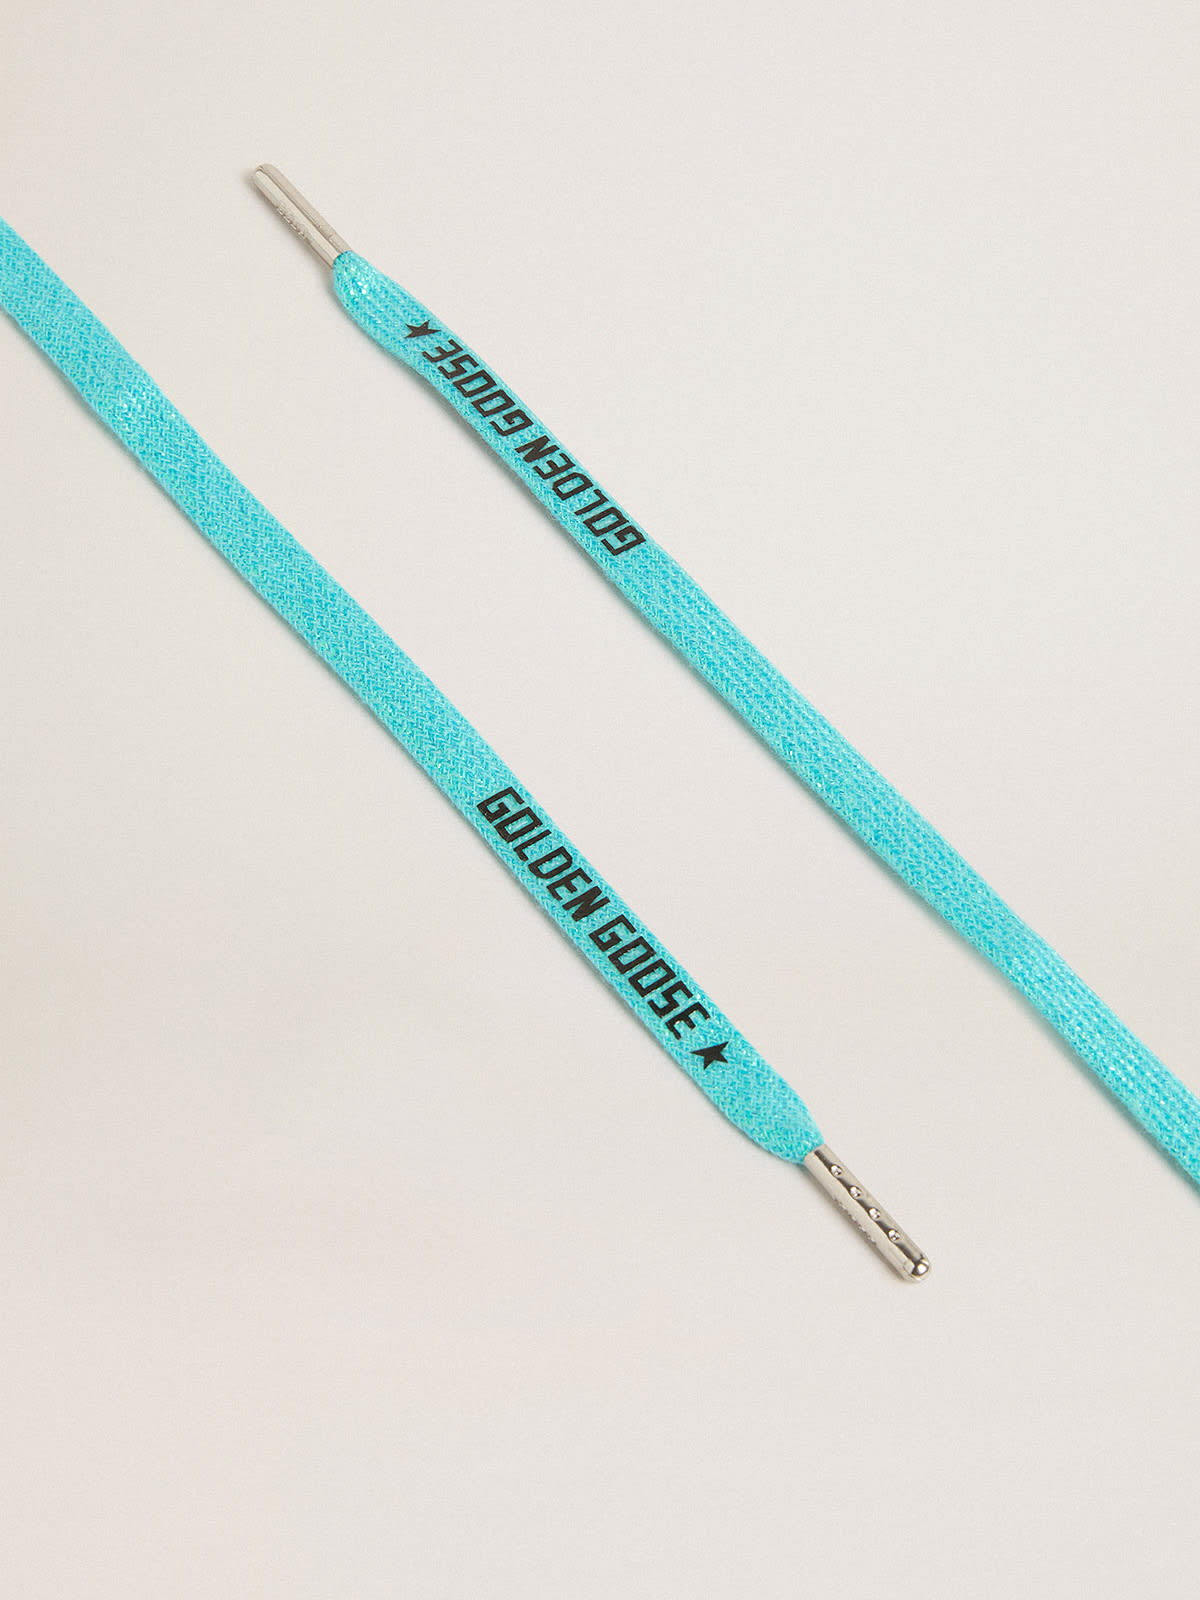 Golden Goose - Light blue Lurex laces with contrasting black logo in 